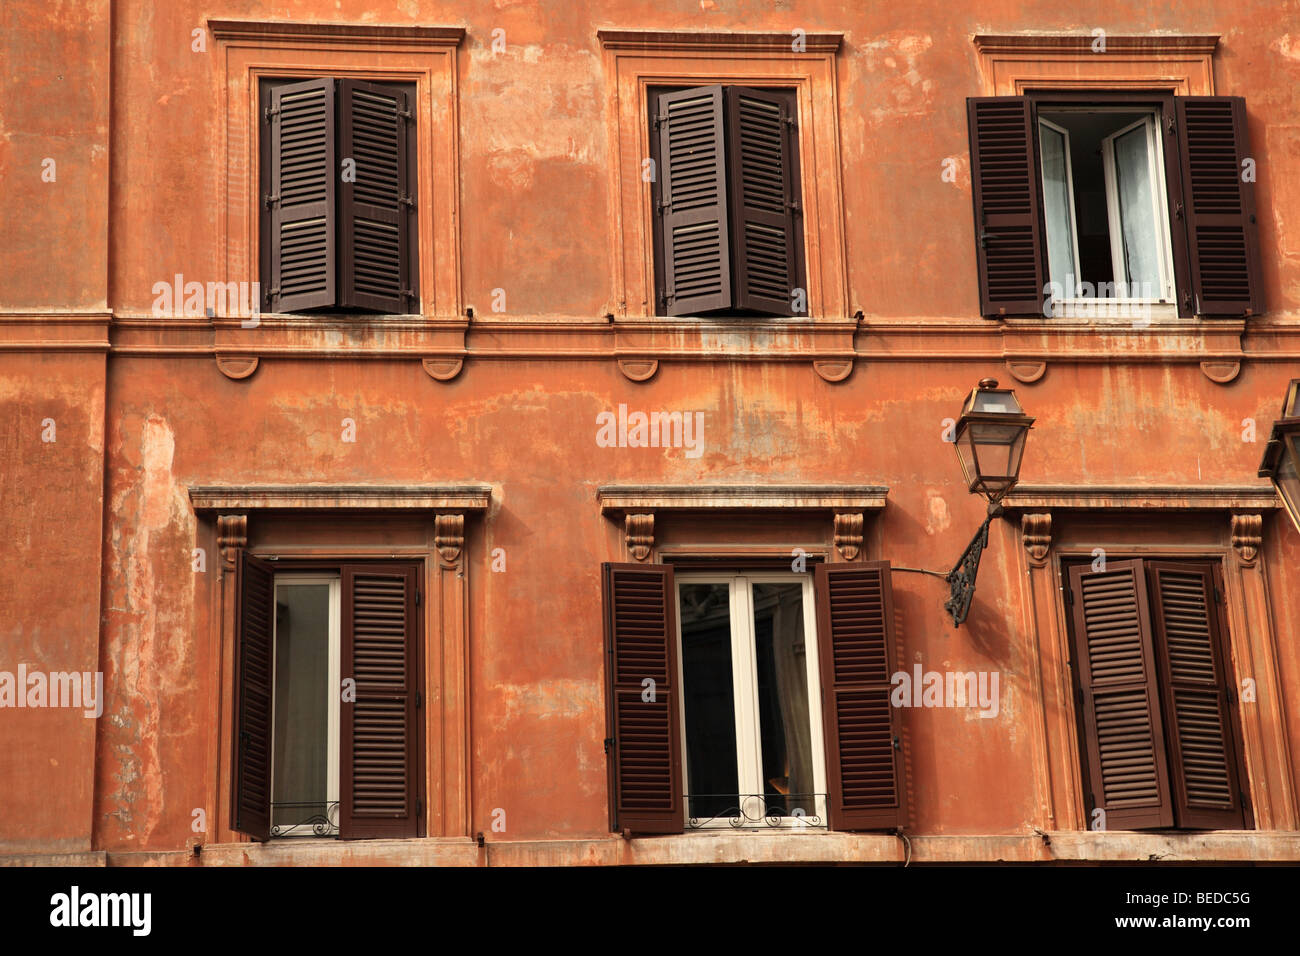 Earthy-toned buildings around Piazza Farnese Rome Stock Photo